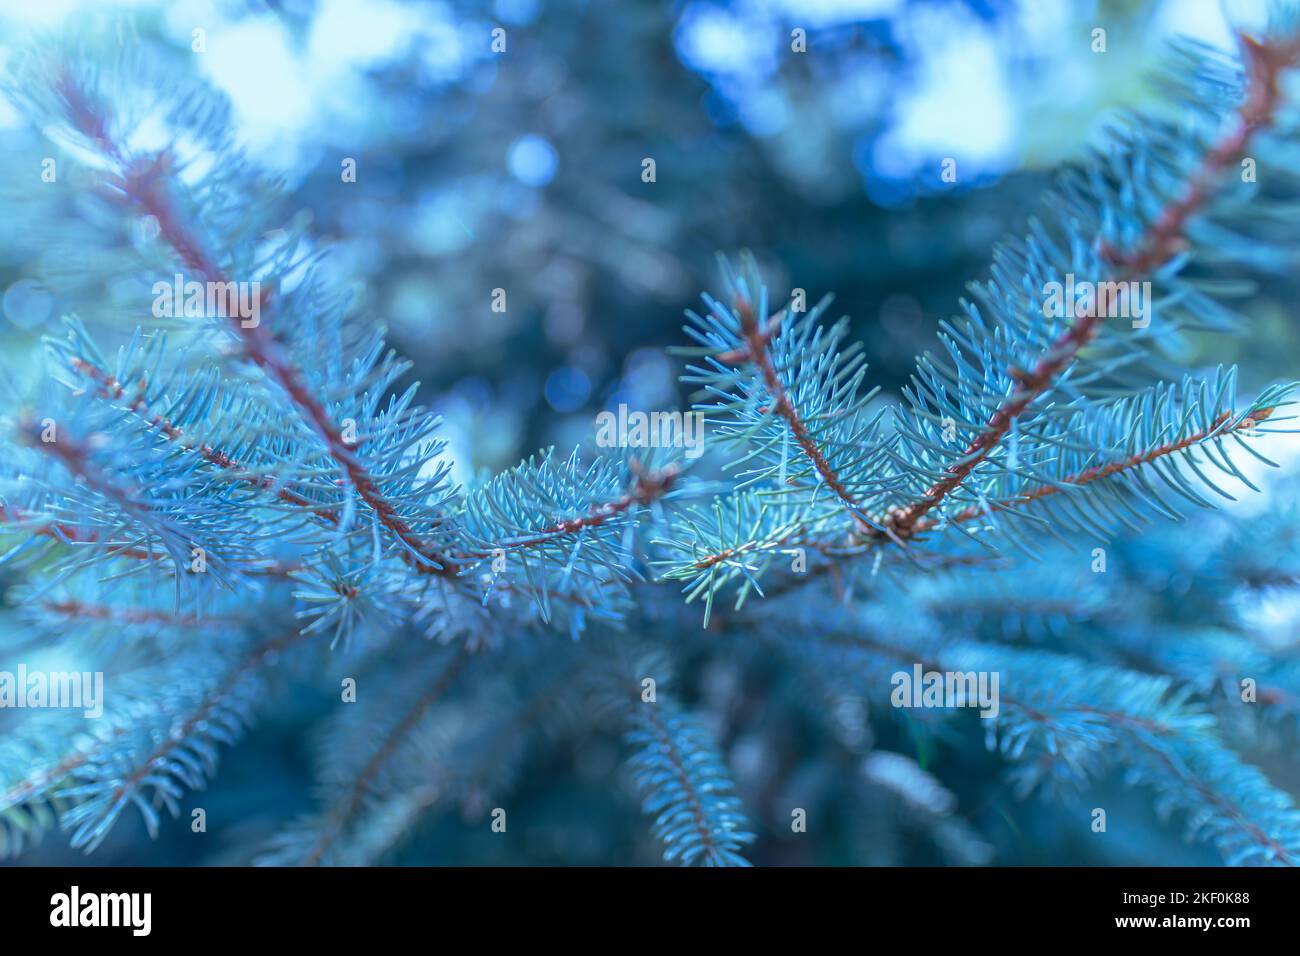 Cold blue tones of green fir tree or pine branches, morning seasonal nature closeup with blurred forest background Stock Photo